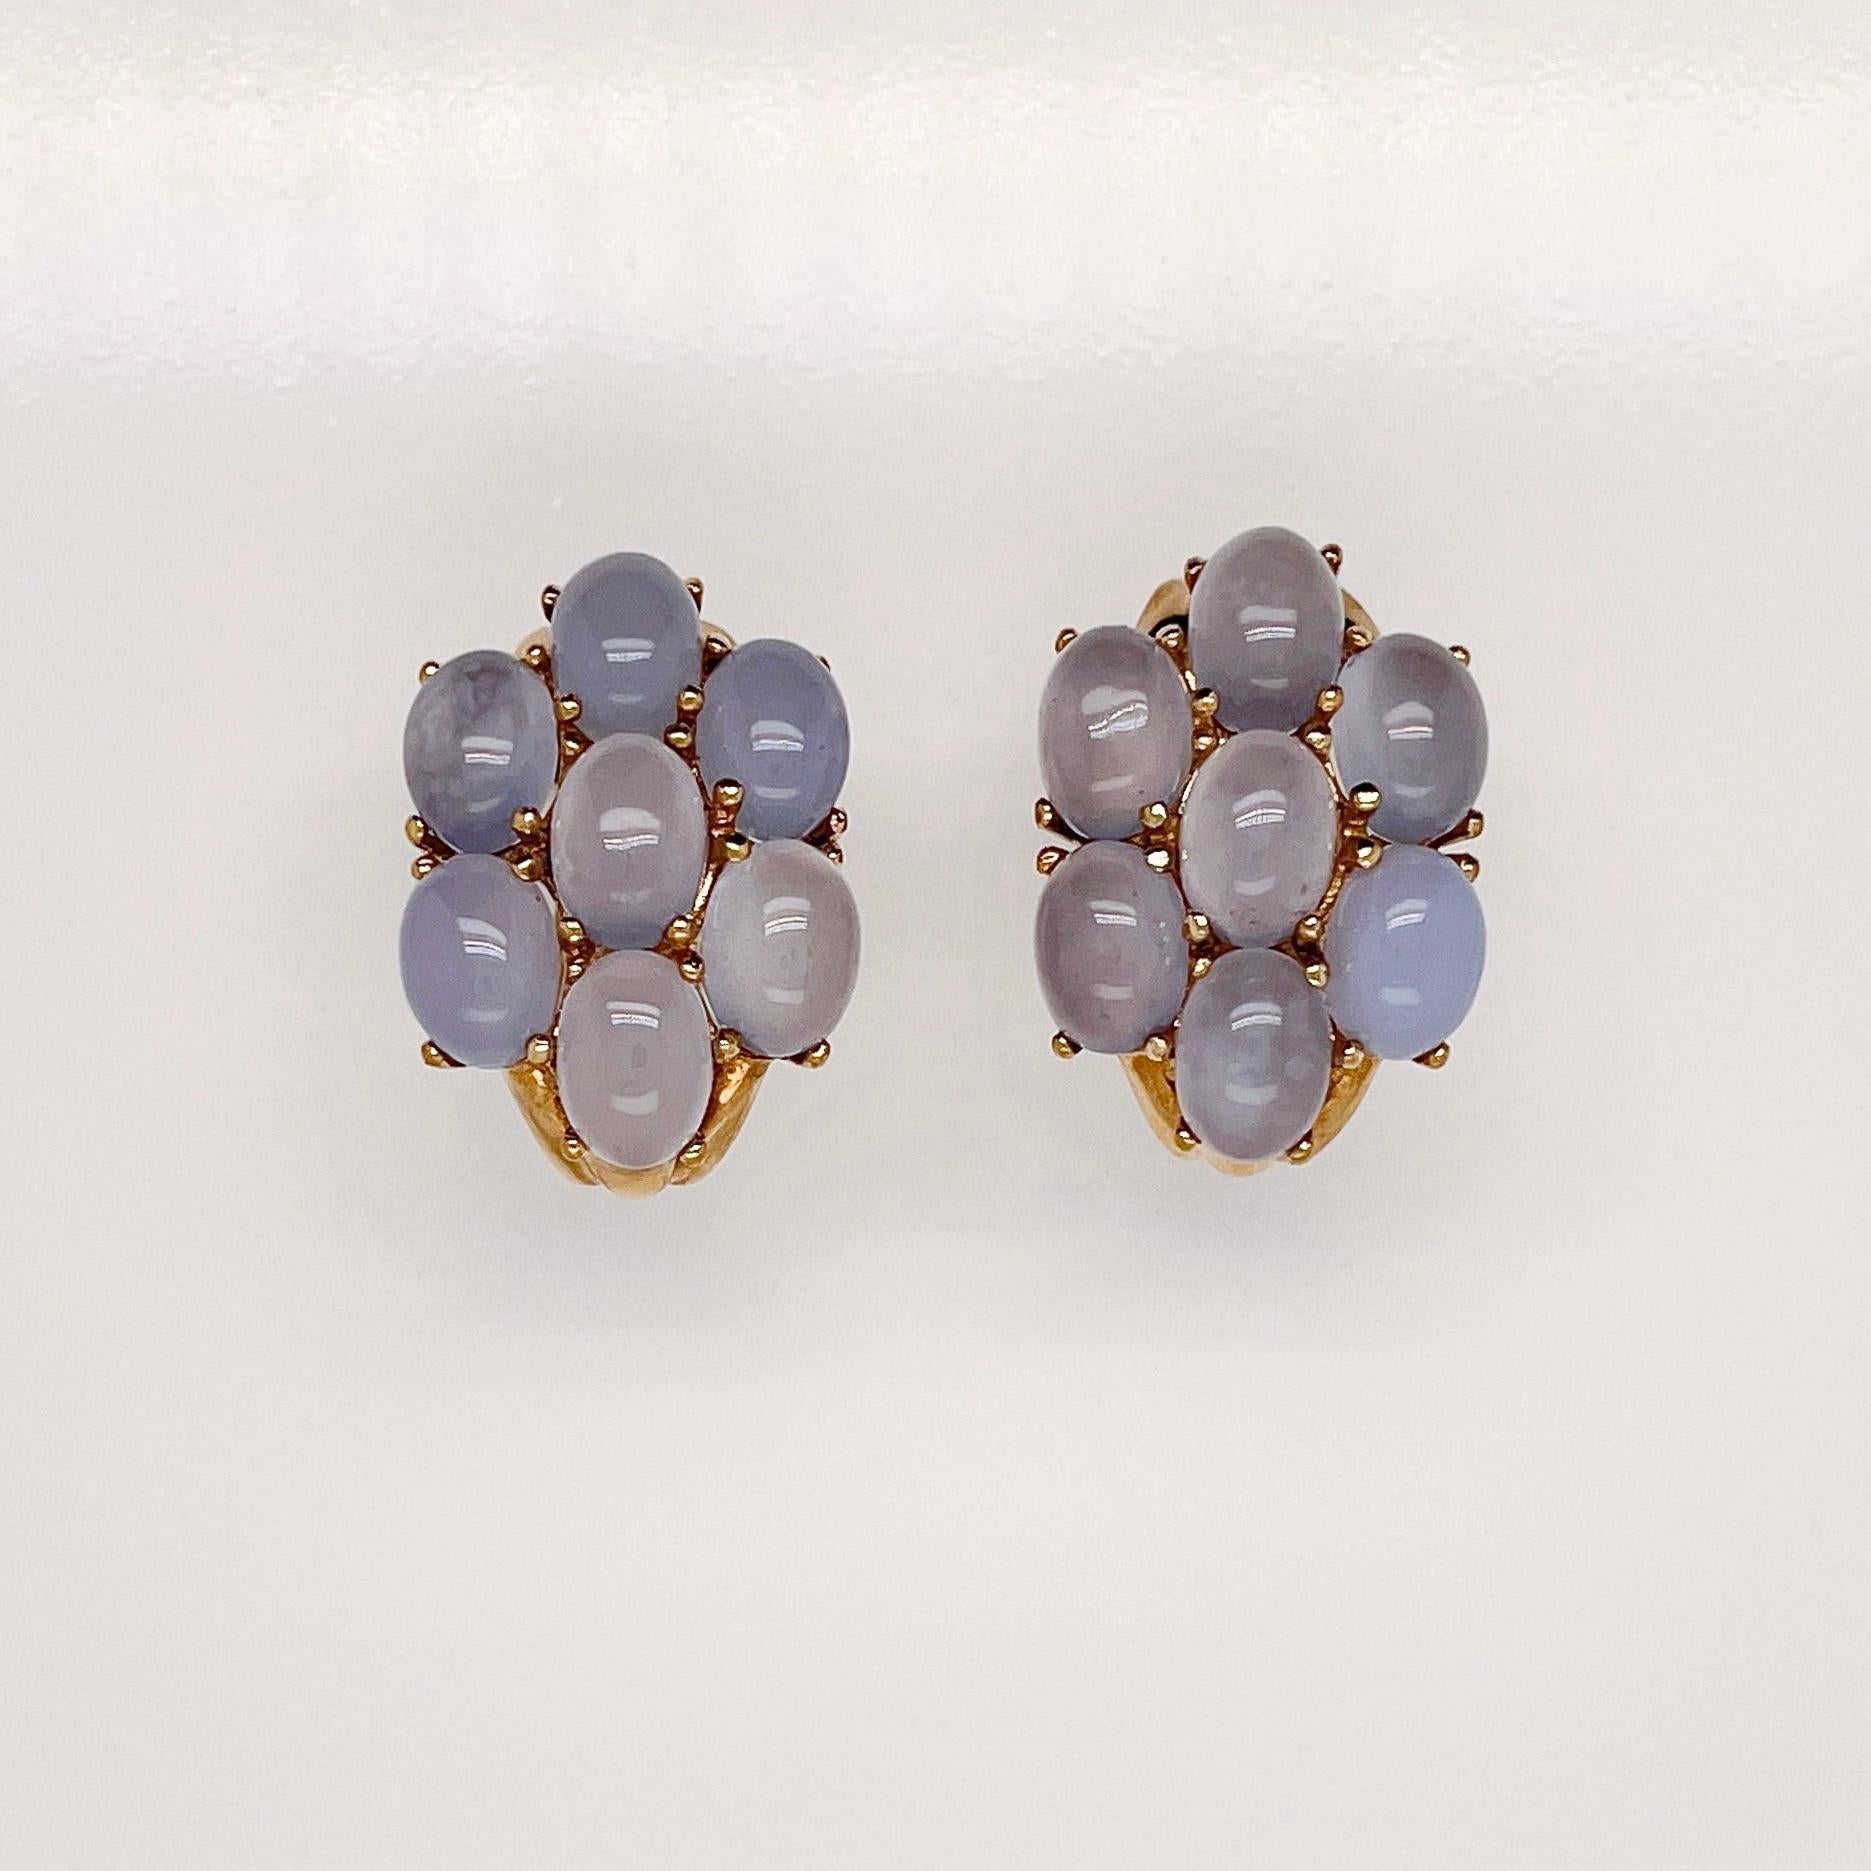 A very fine pair of gold & moonstone earrings.

Each prong set with light purple-blue moonstone cabochons in a stylized flower form 14k gold setting. 

Secured with omega clips for extra safety.

Simply wonderful earrings!

Date:
20th